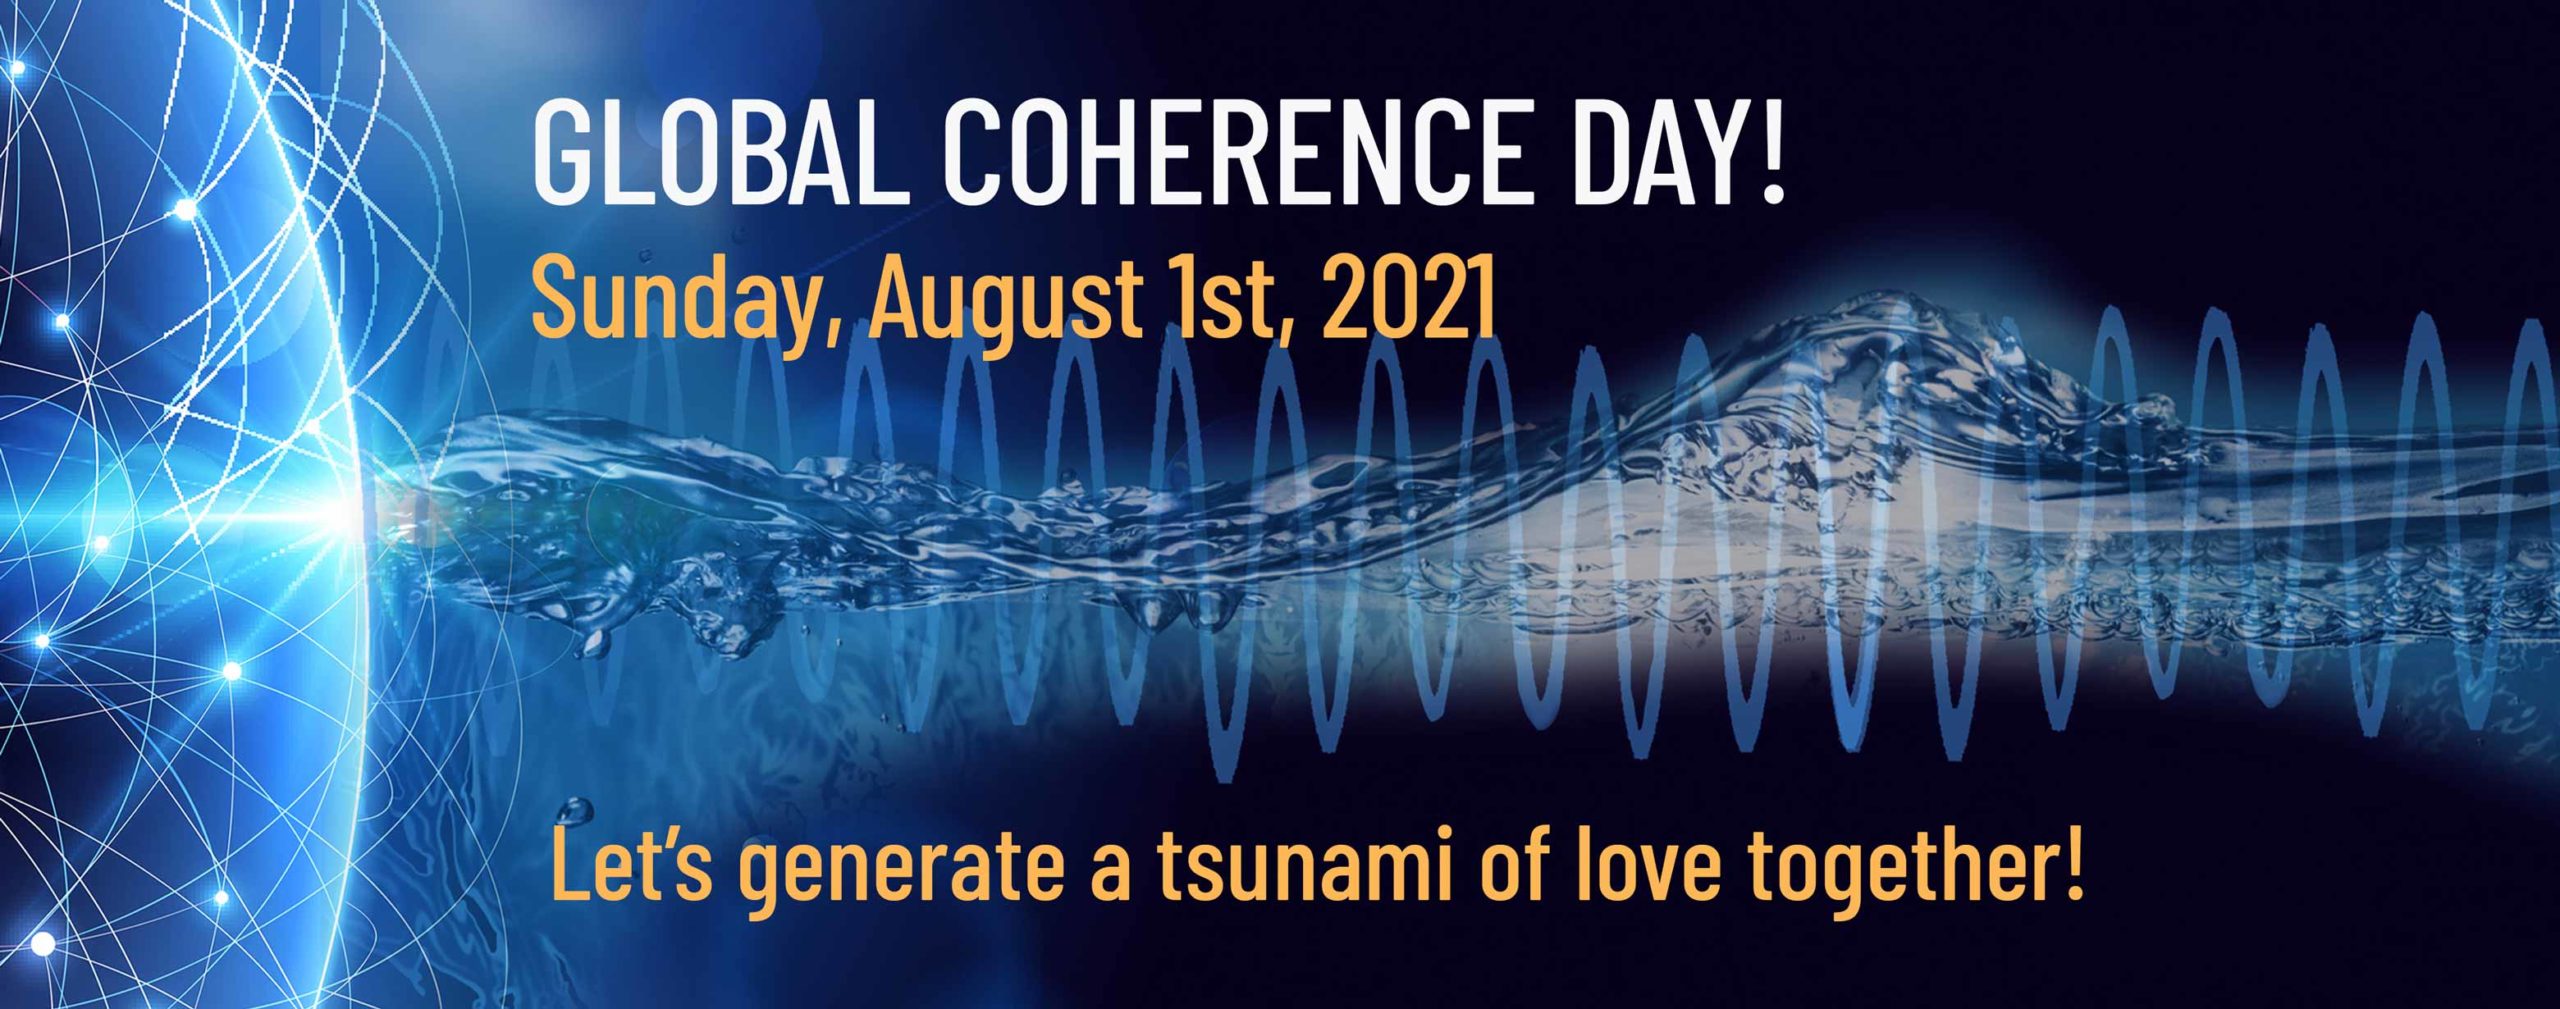 global coherence meaning